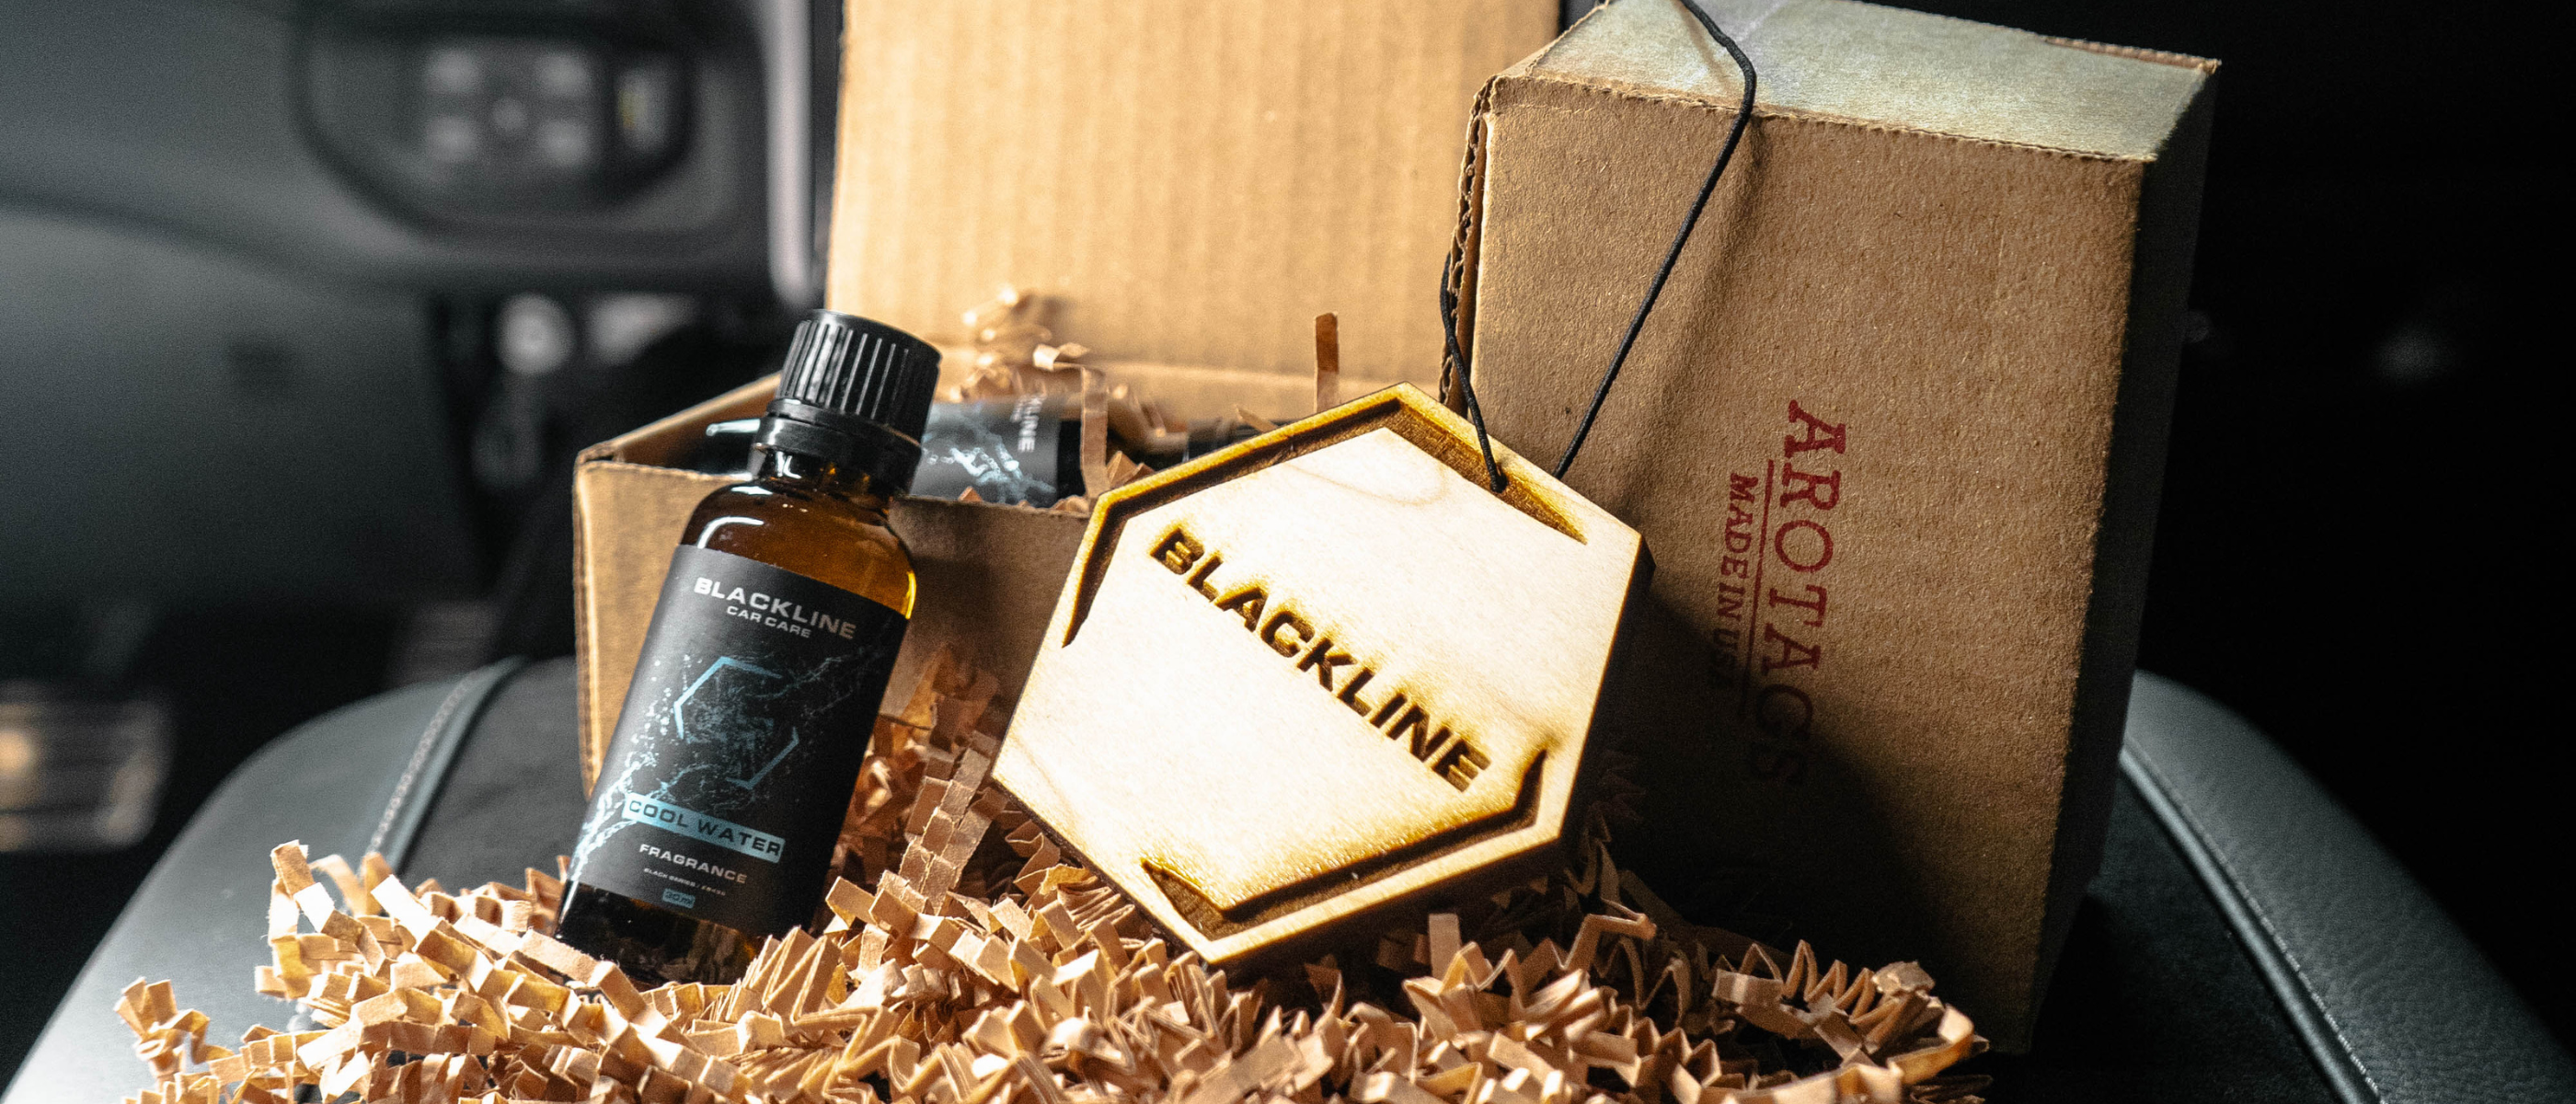 Blackline Car Care care package review #detailingproducts